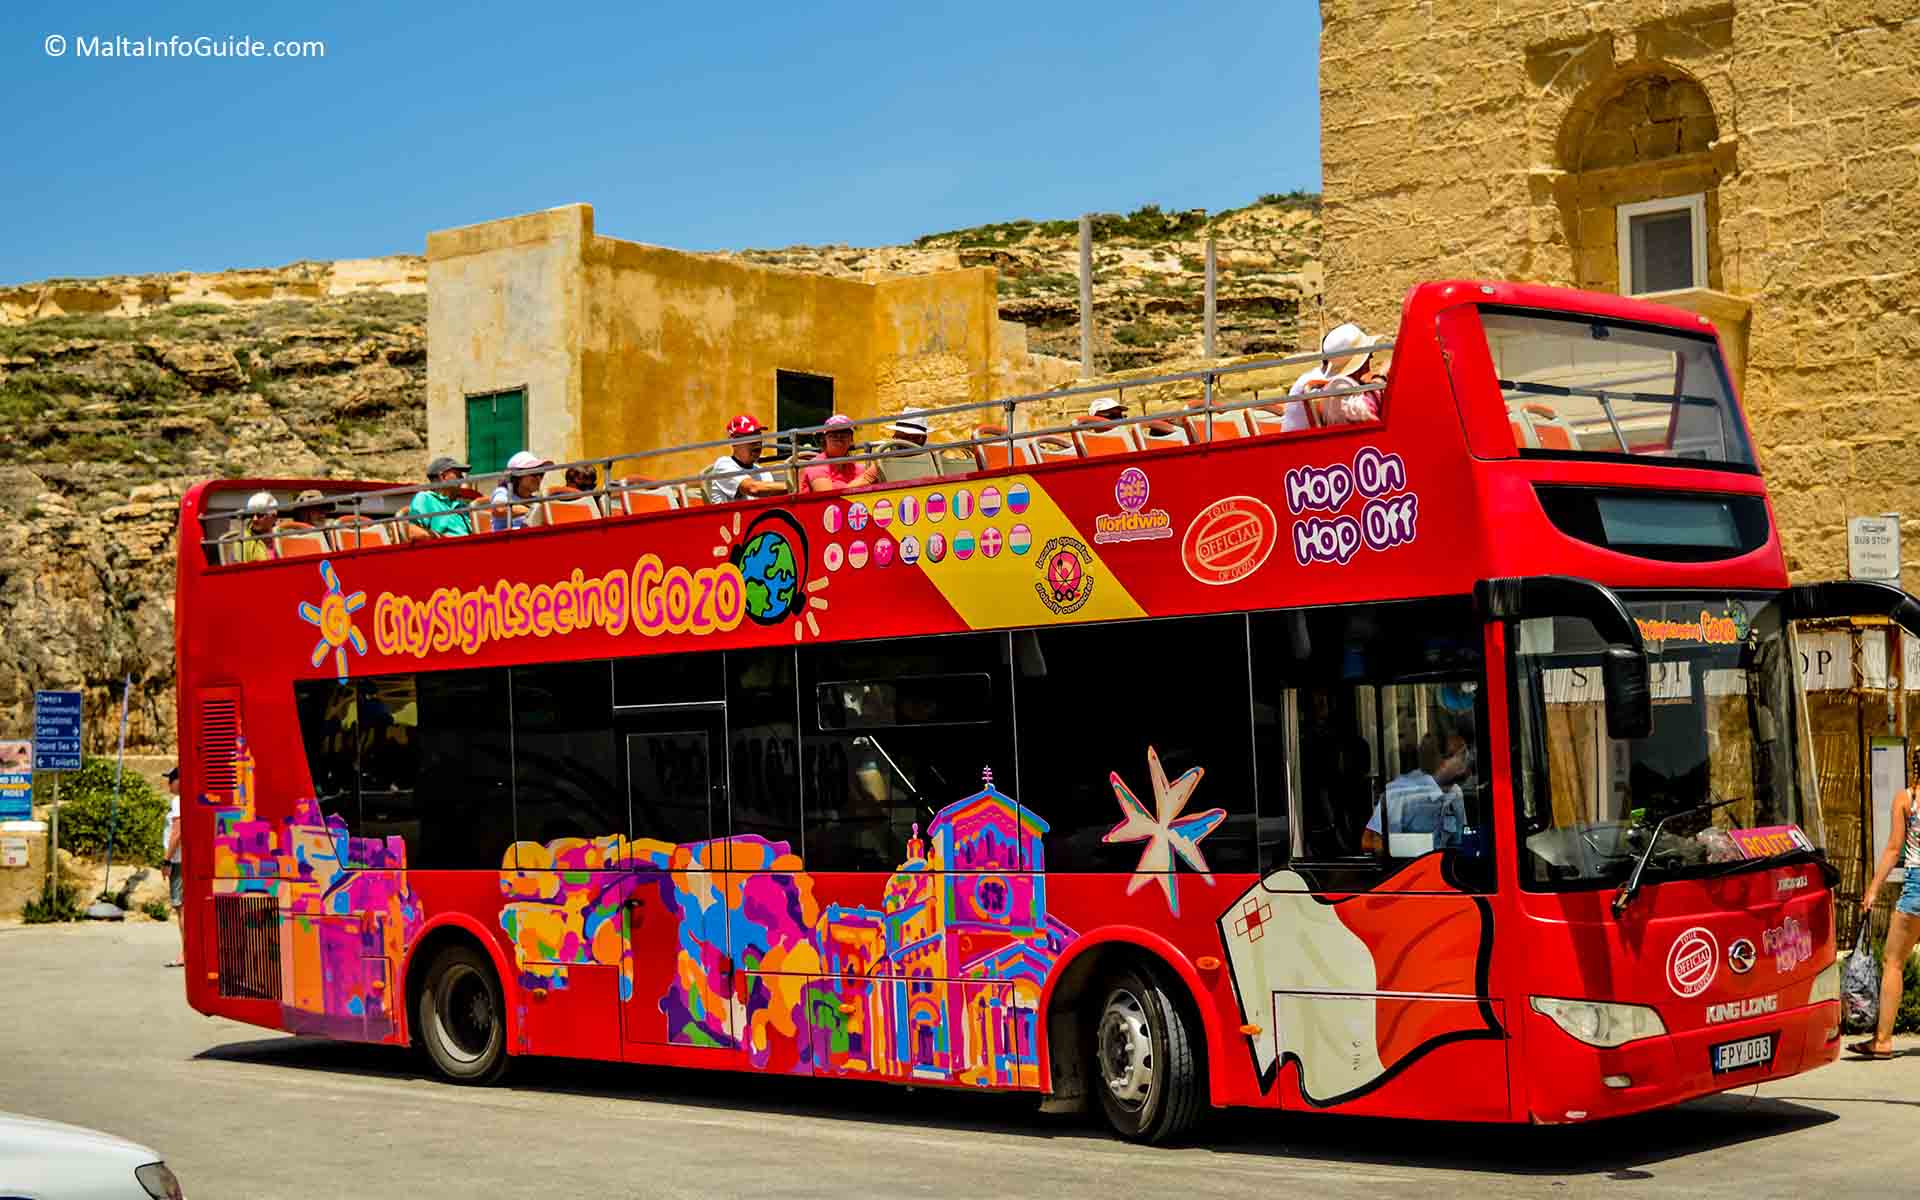 People on the Gozo sightseeing tour bus.